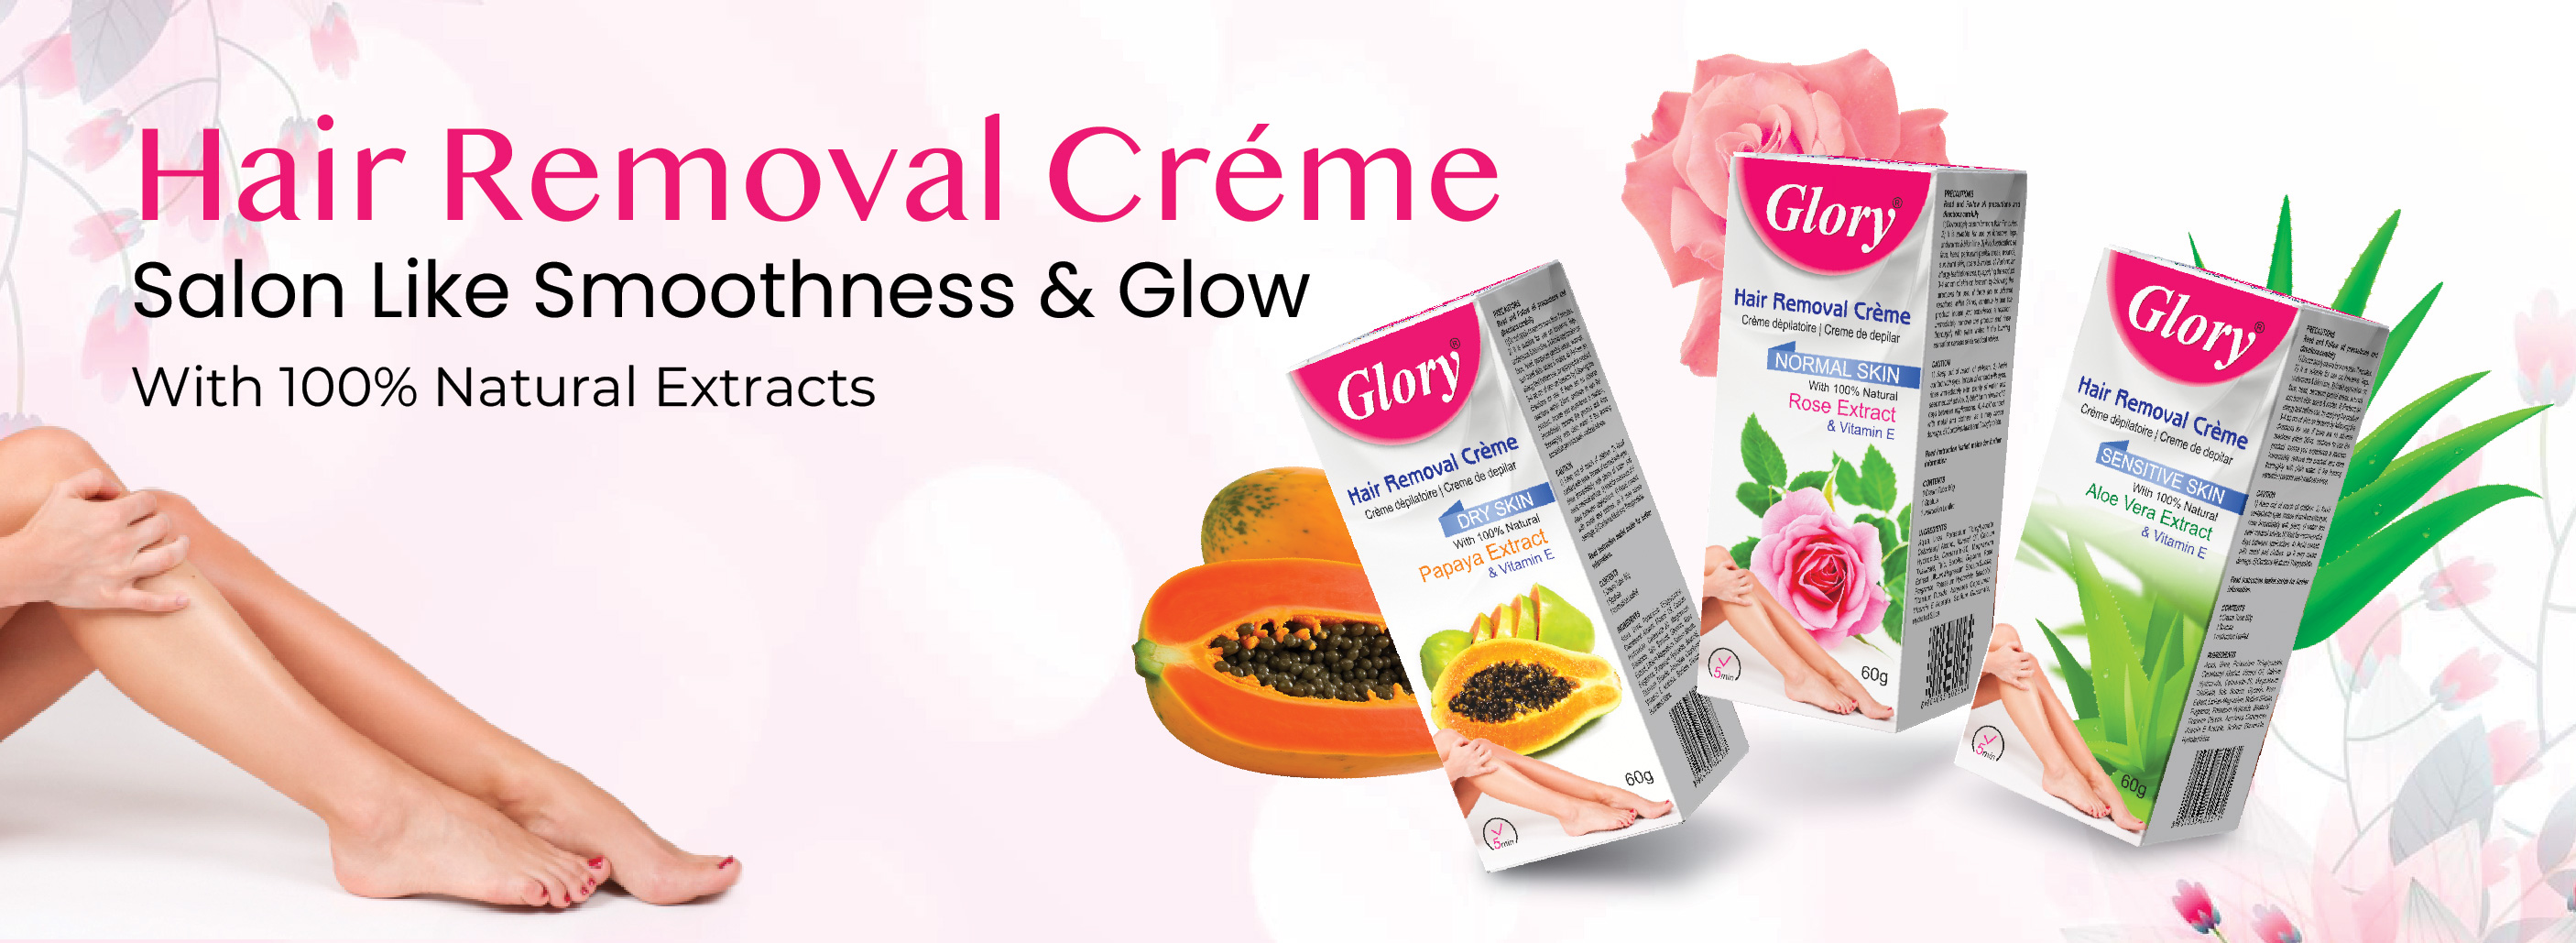 Hair Removal Creme Manufacturer | Hair Removal Creme Manufacturer in New Zealand